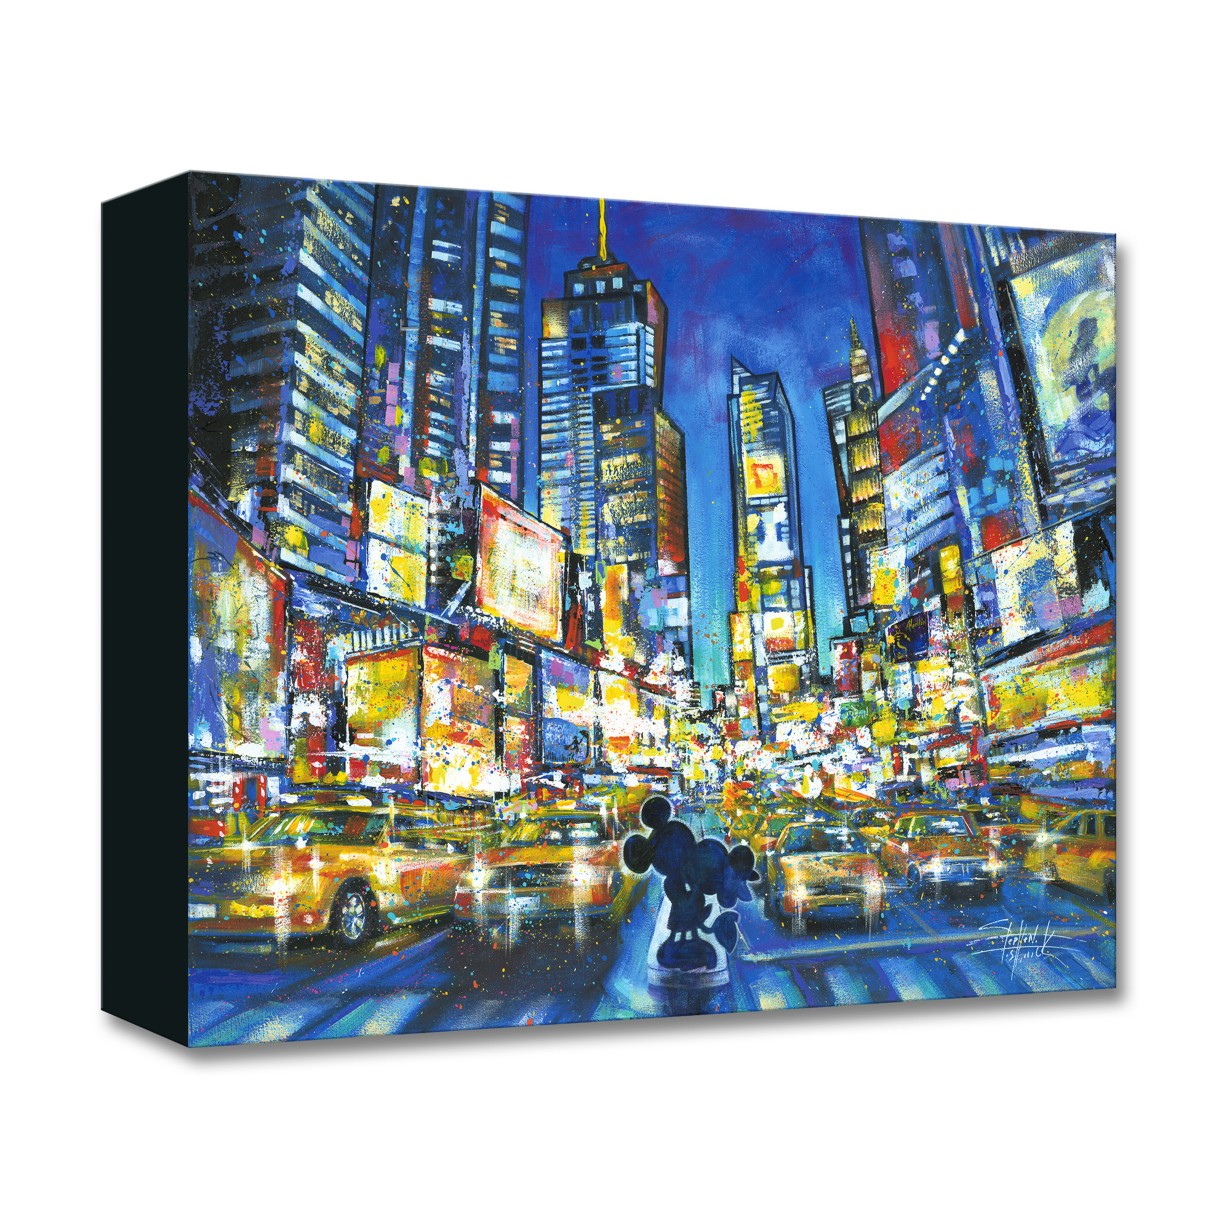 Mickey and Minnie Mouse ''You, Me, and the City'' Giclée on Canvas by Stephen Fishwick